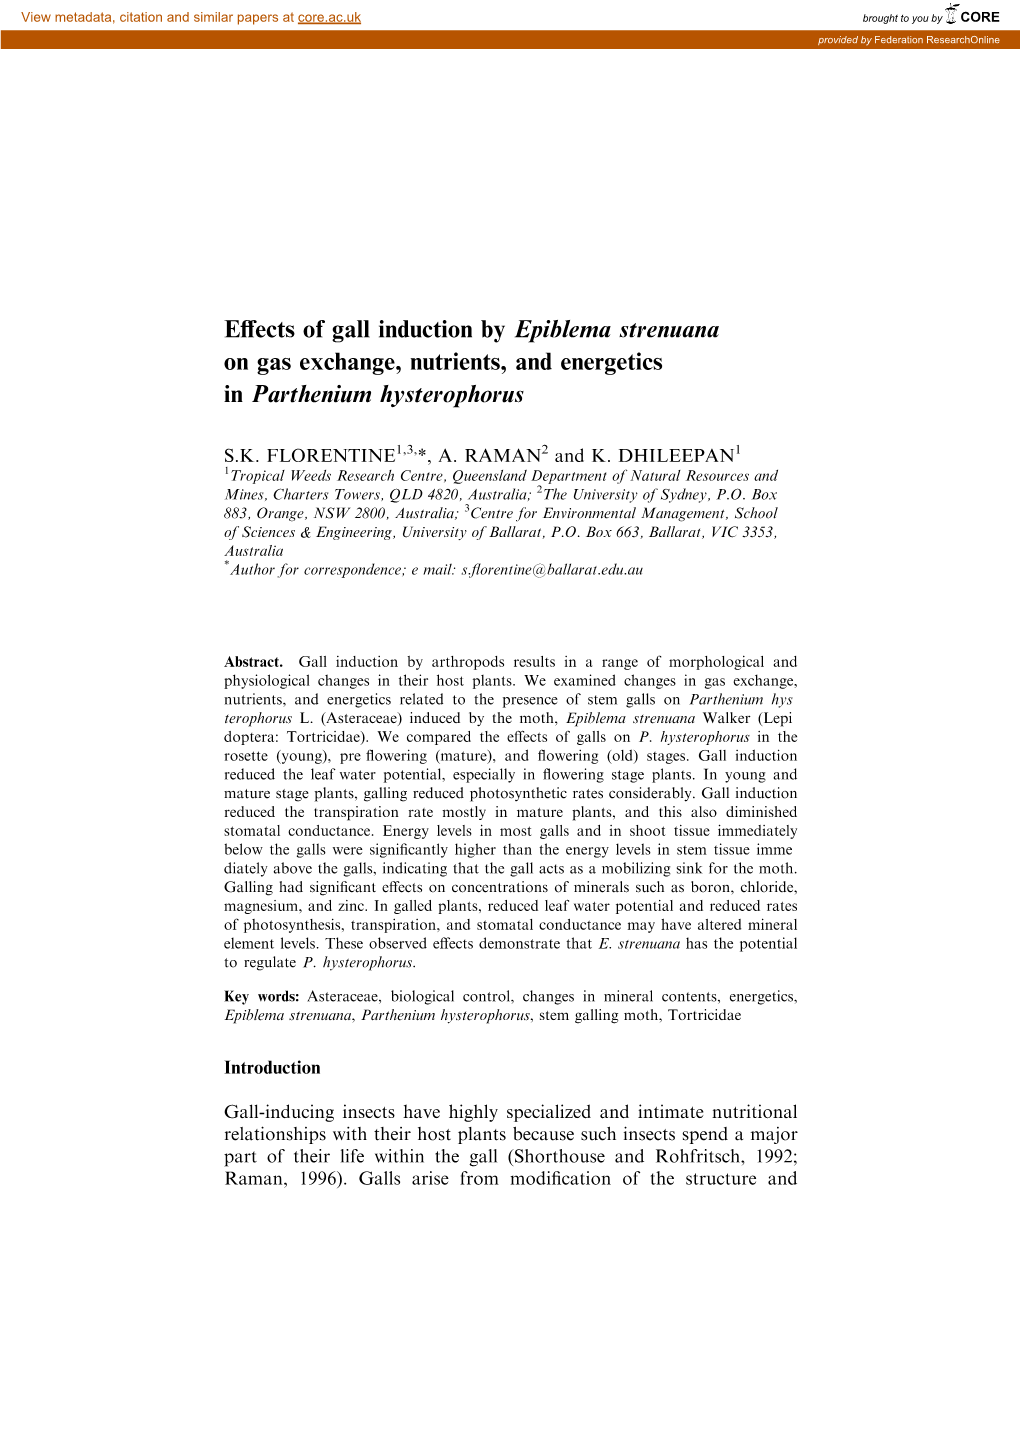 Effects of Gall Induction by Epiblema Strenuana on Gas Exchange